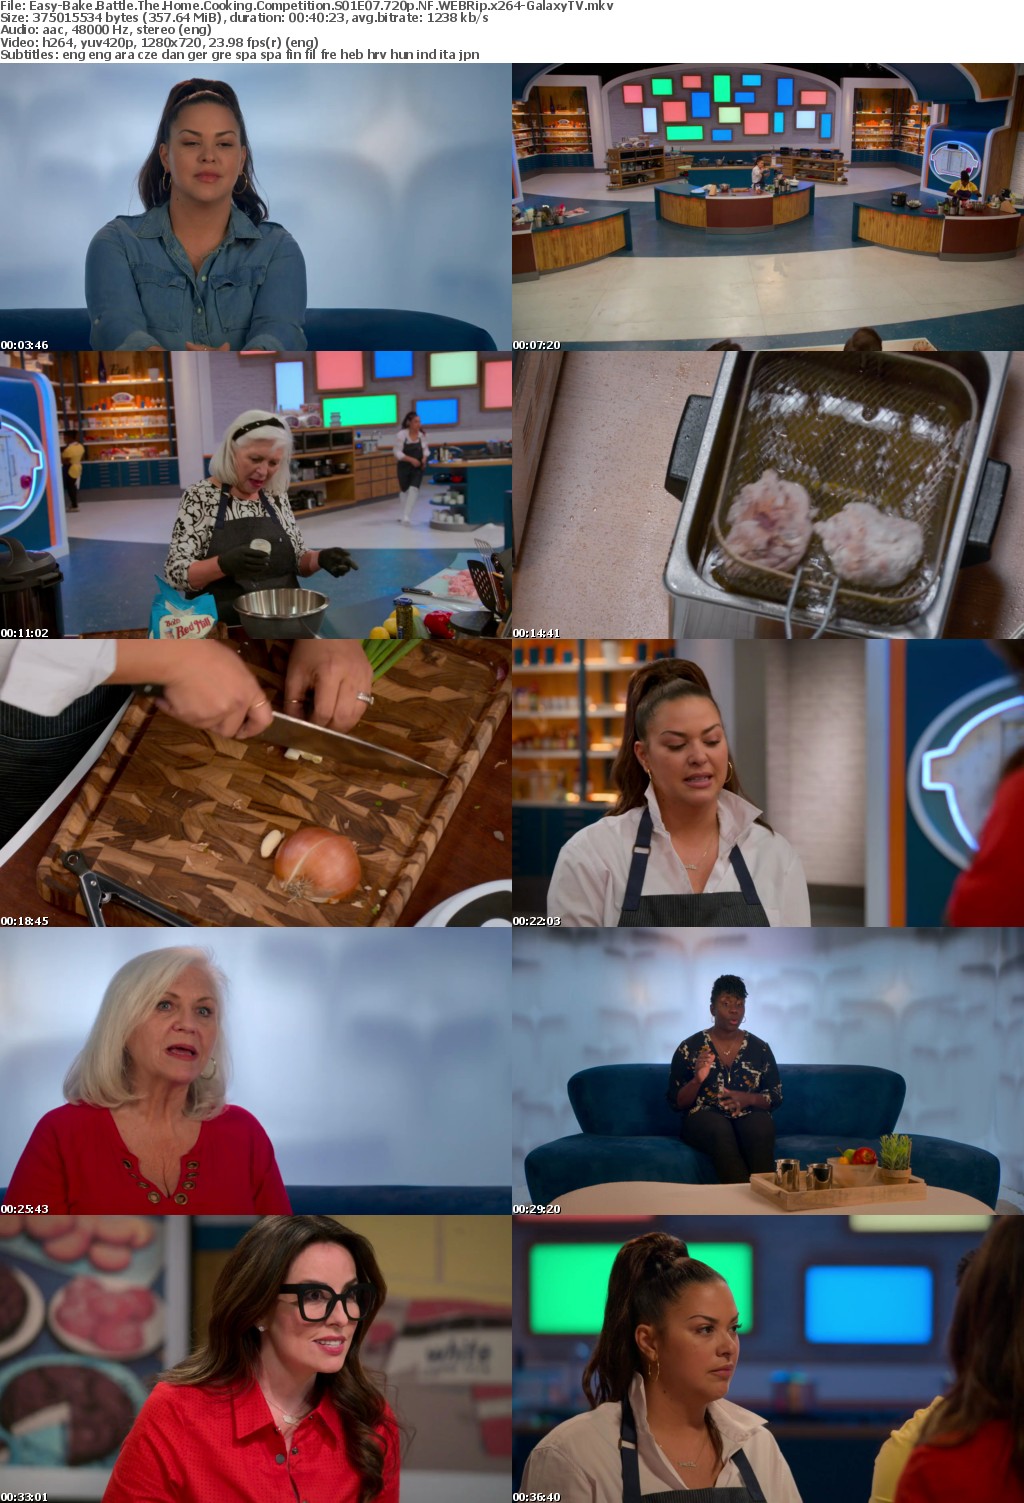 Easy-Bake Battle The Home Cooking Competition S01 COMPLETE 720p NF WEBRip x264-GalaxyTV